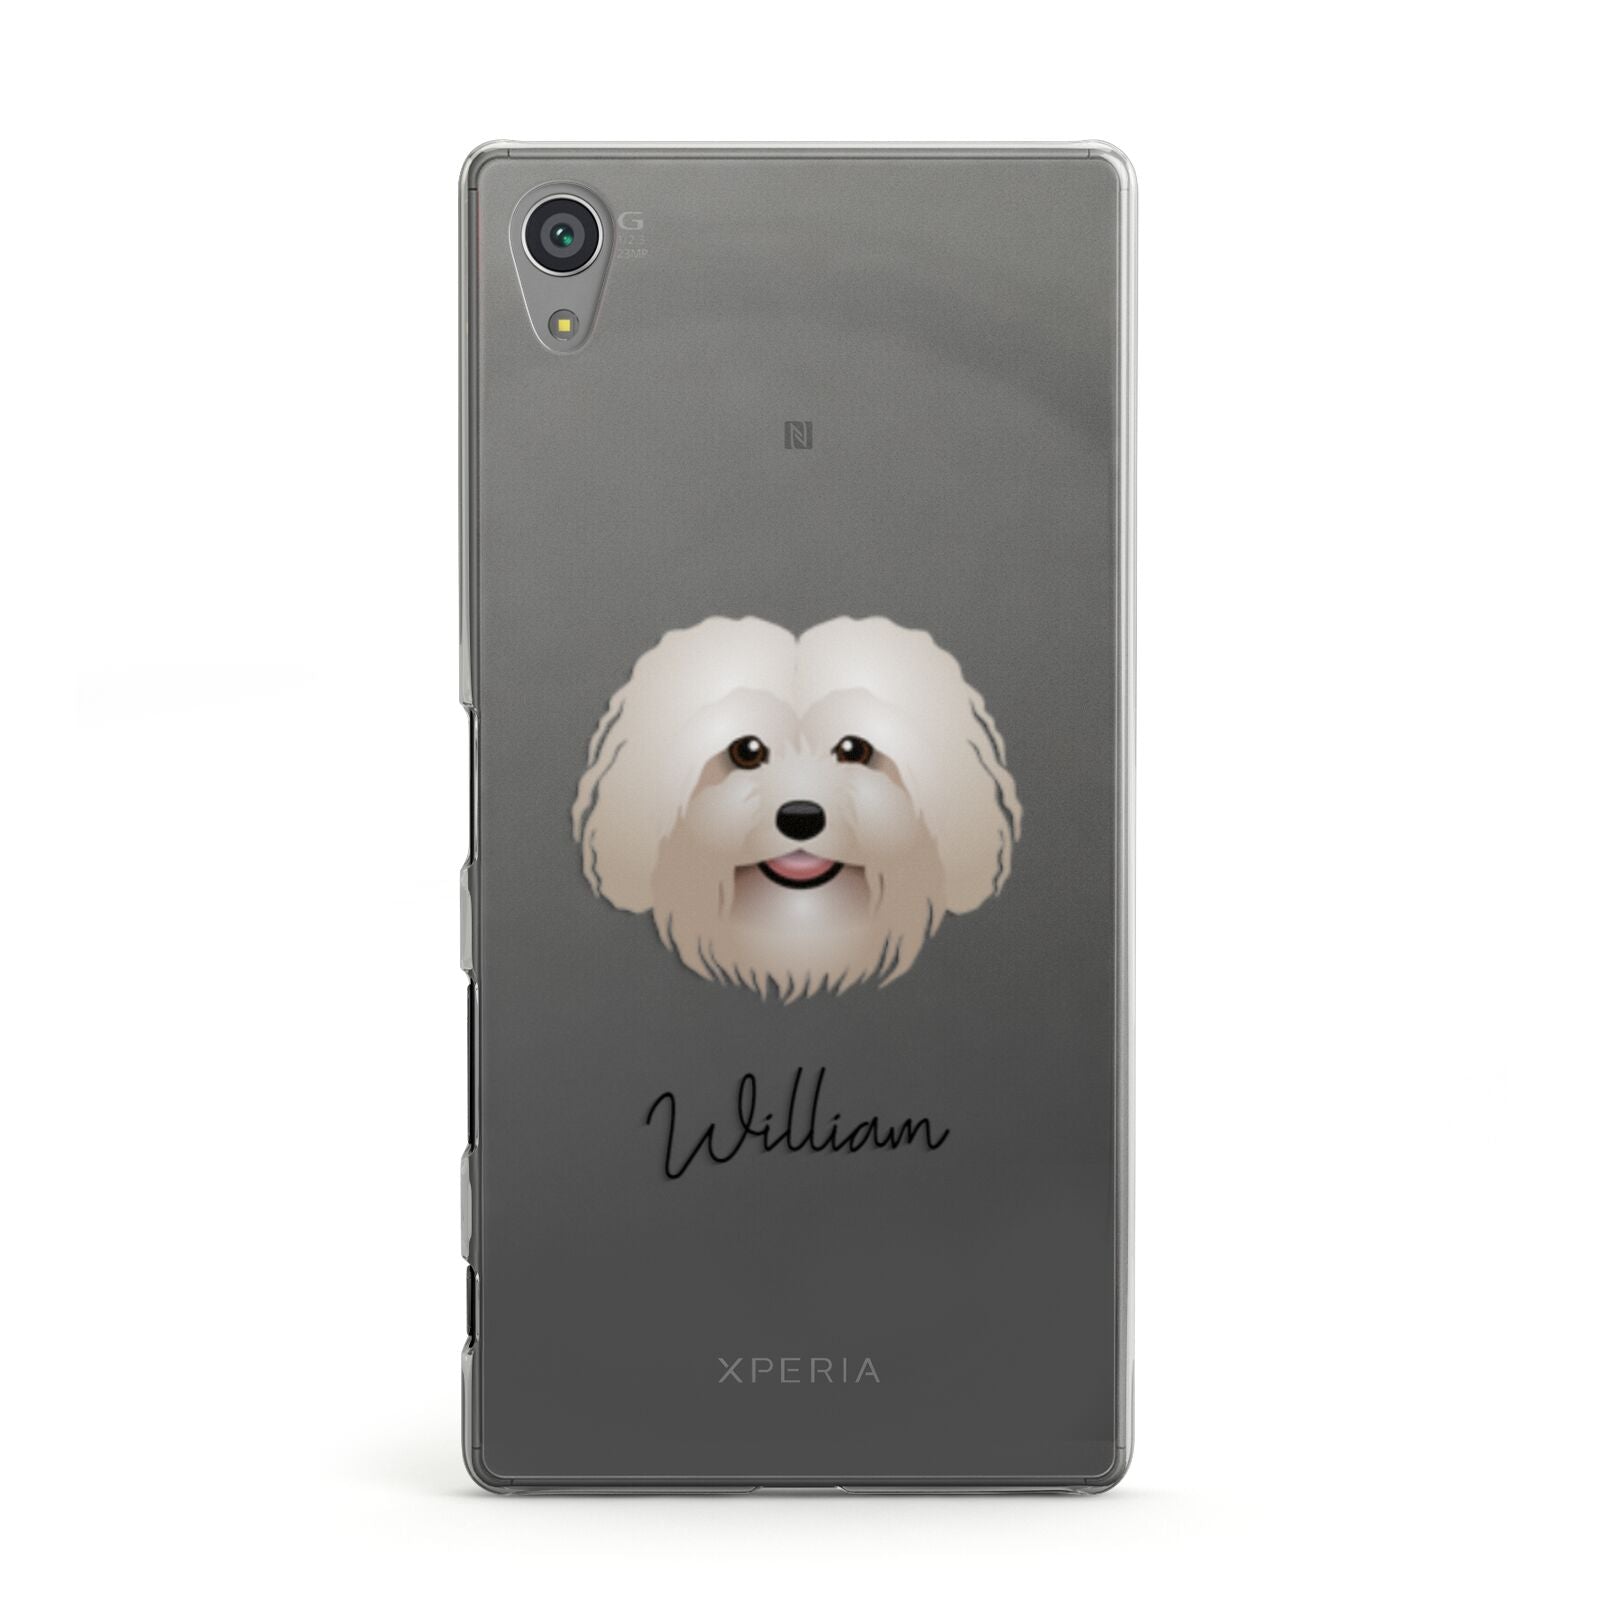 Bolognese Personalised Sony Xperia Case